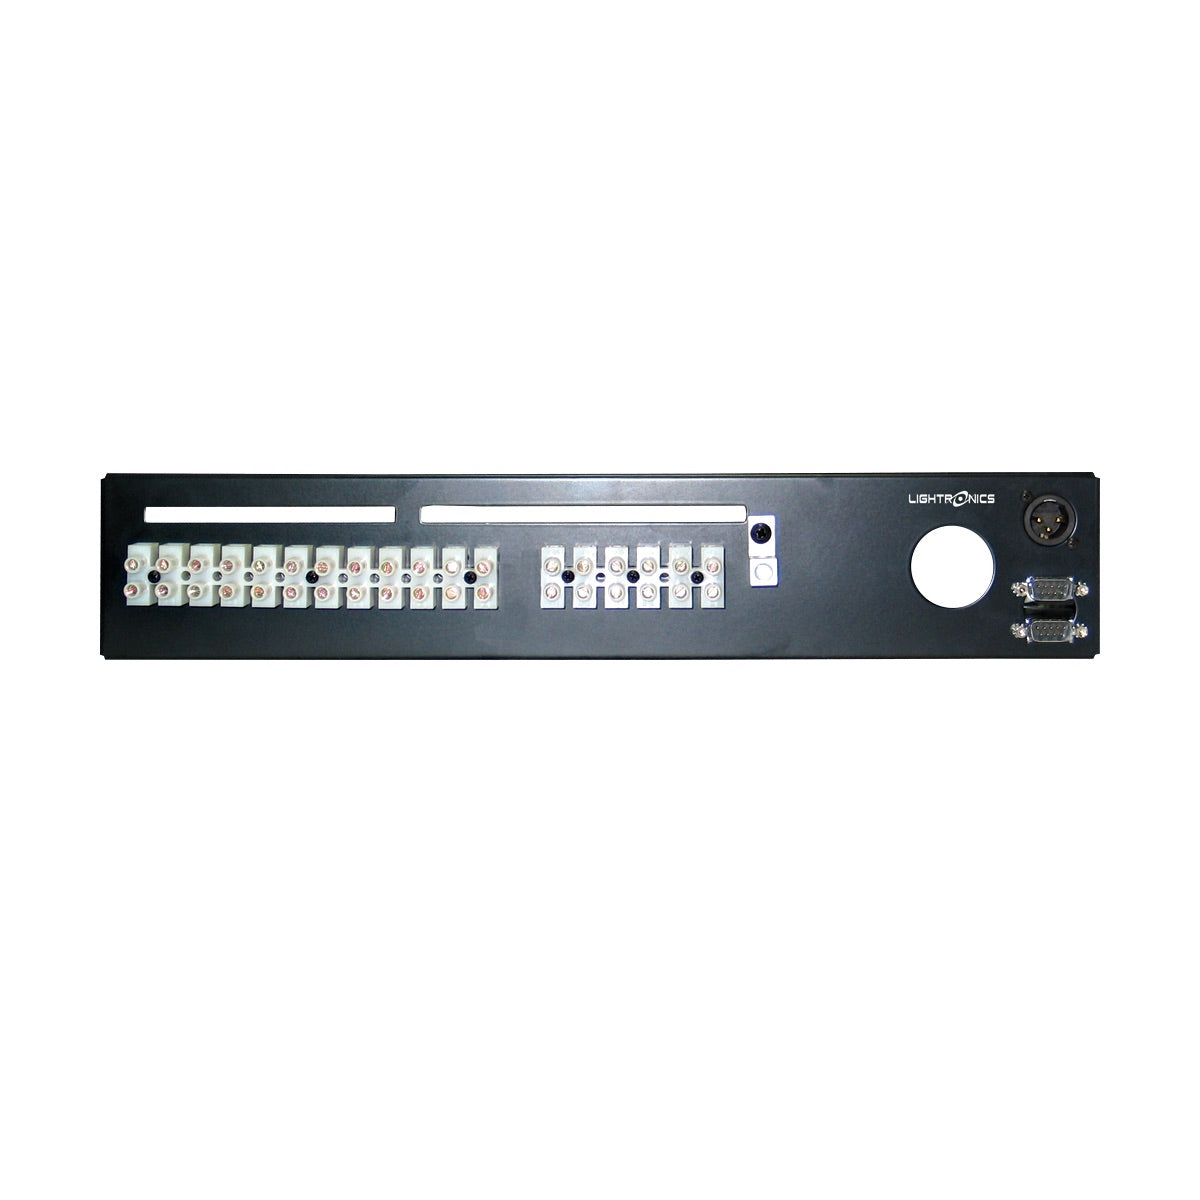 Lightronics RE121L Rack Mount Dimmer, RE Series, rear Terminal/Barrier Connector Strip with Knockout Cover